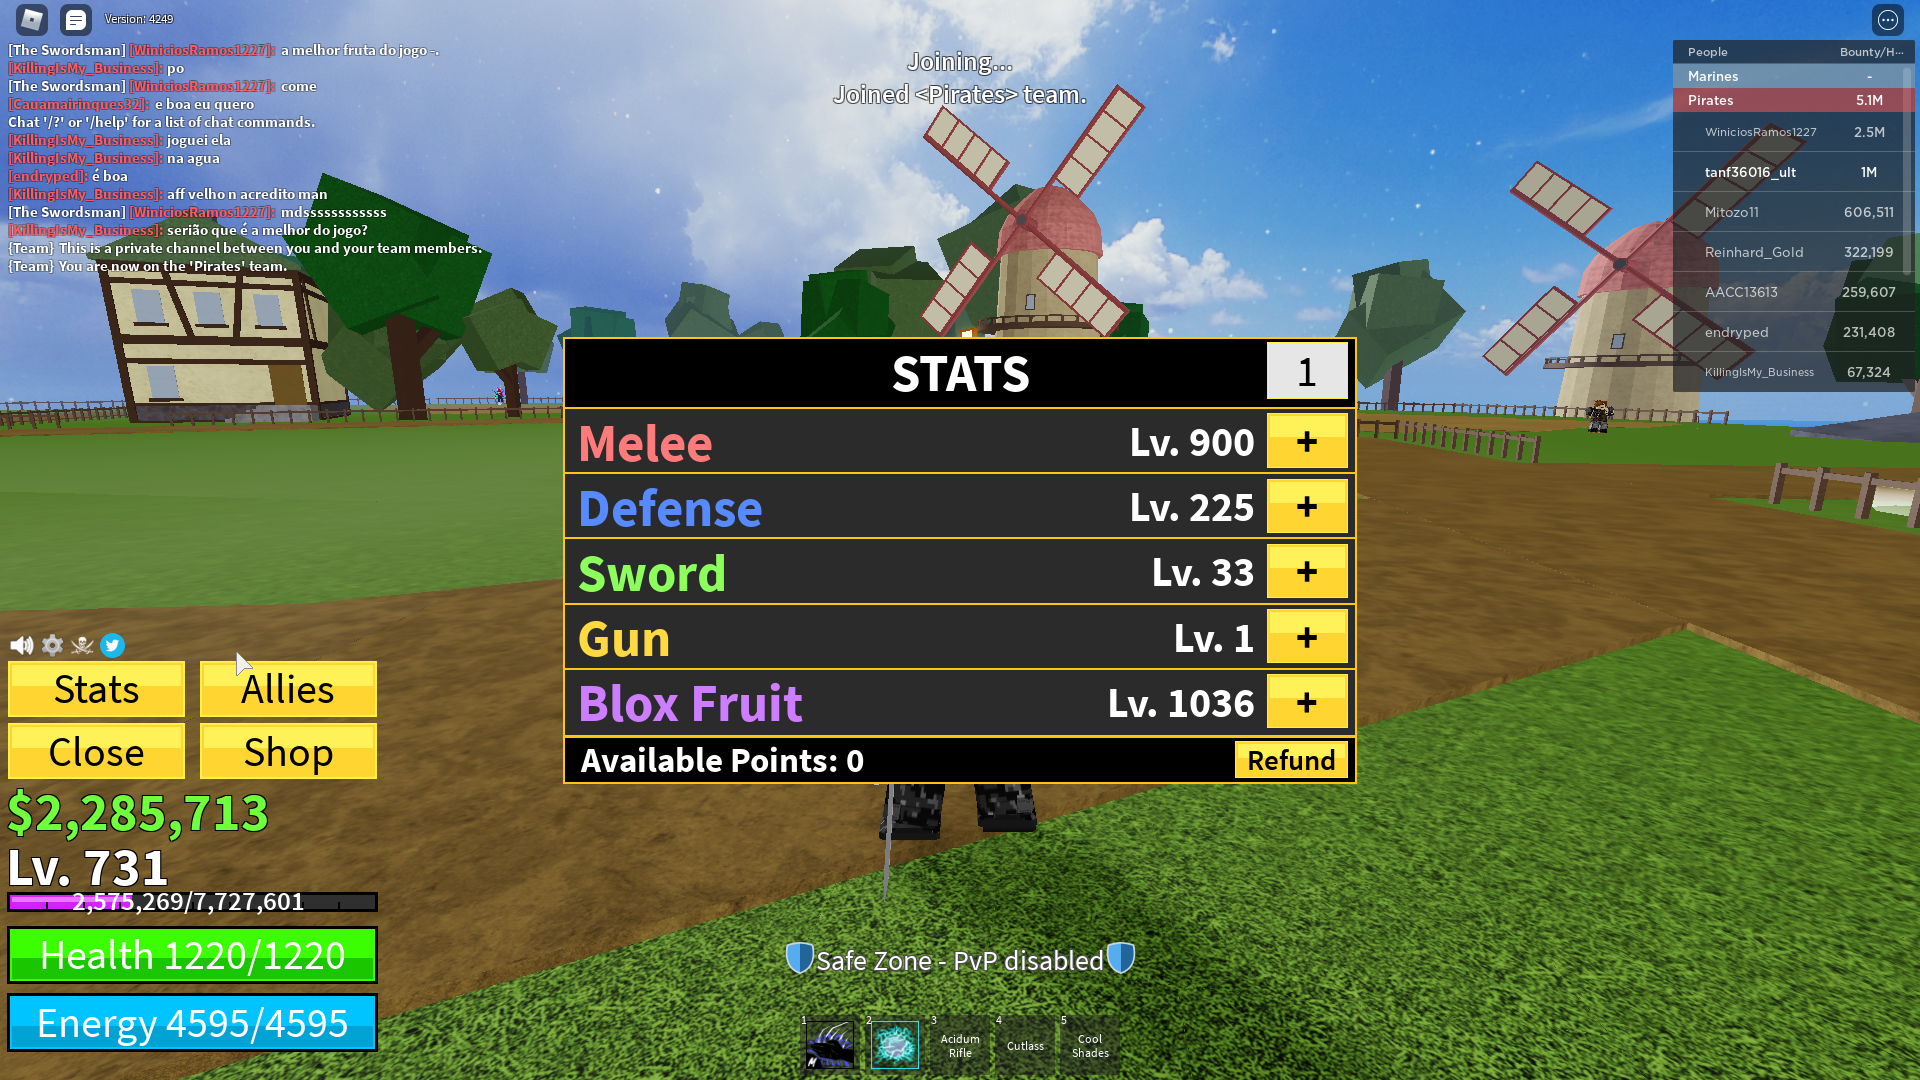 Hybrid Stats are so OP in Bloxfruits 